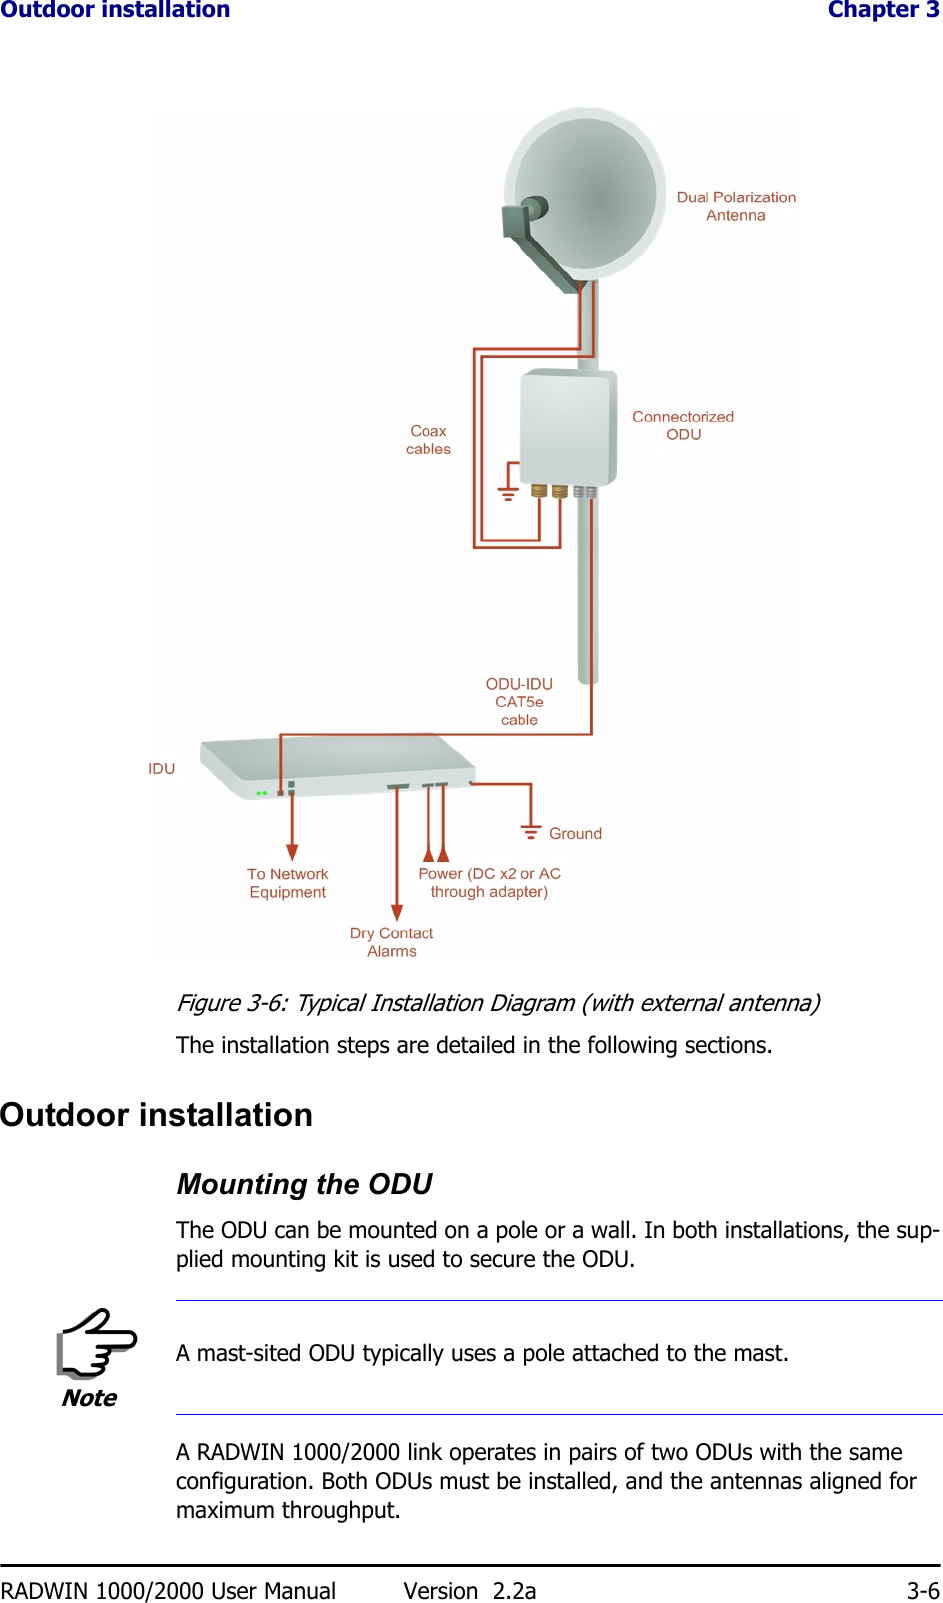 Outdoor installation  Chapter 3RADWIN 1000/2000 User Manual Version  2.2a 3-6Figure 3-6: Typical Installation Diagram (with external antenna)The installation steps are detailed in the following sections.Outdoor installationMounting the ODUThe ODU can be mounted on a pole or a wall. In both installations, the sup-plied mounting kit is used to secure the ODU.A RADWIN 1000/2000 link operates in pairs of two ODUs with the same configuration. Both ODUs must be installed, and the antennas aligned for maximum throughput.NoteA mast-sited ODU typically uses a pole attached to the mast.